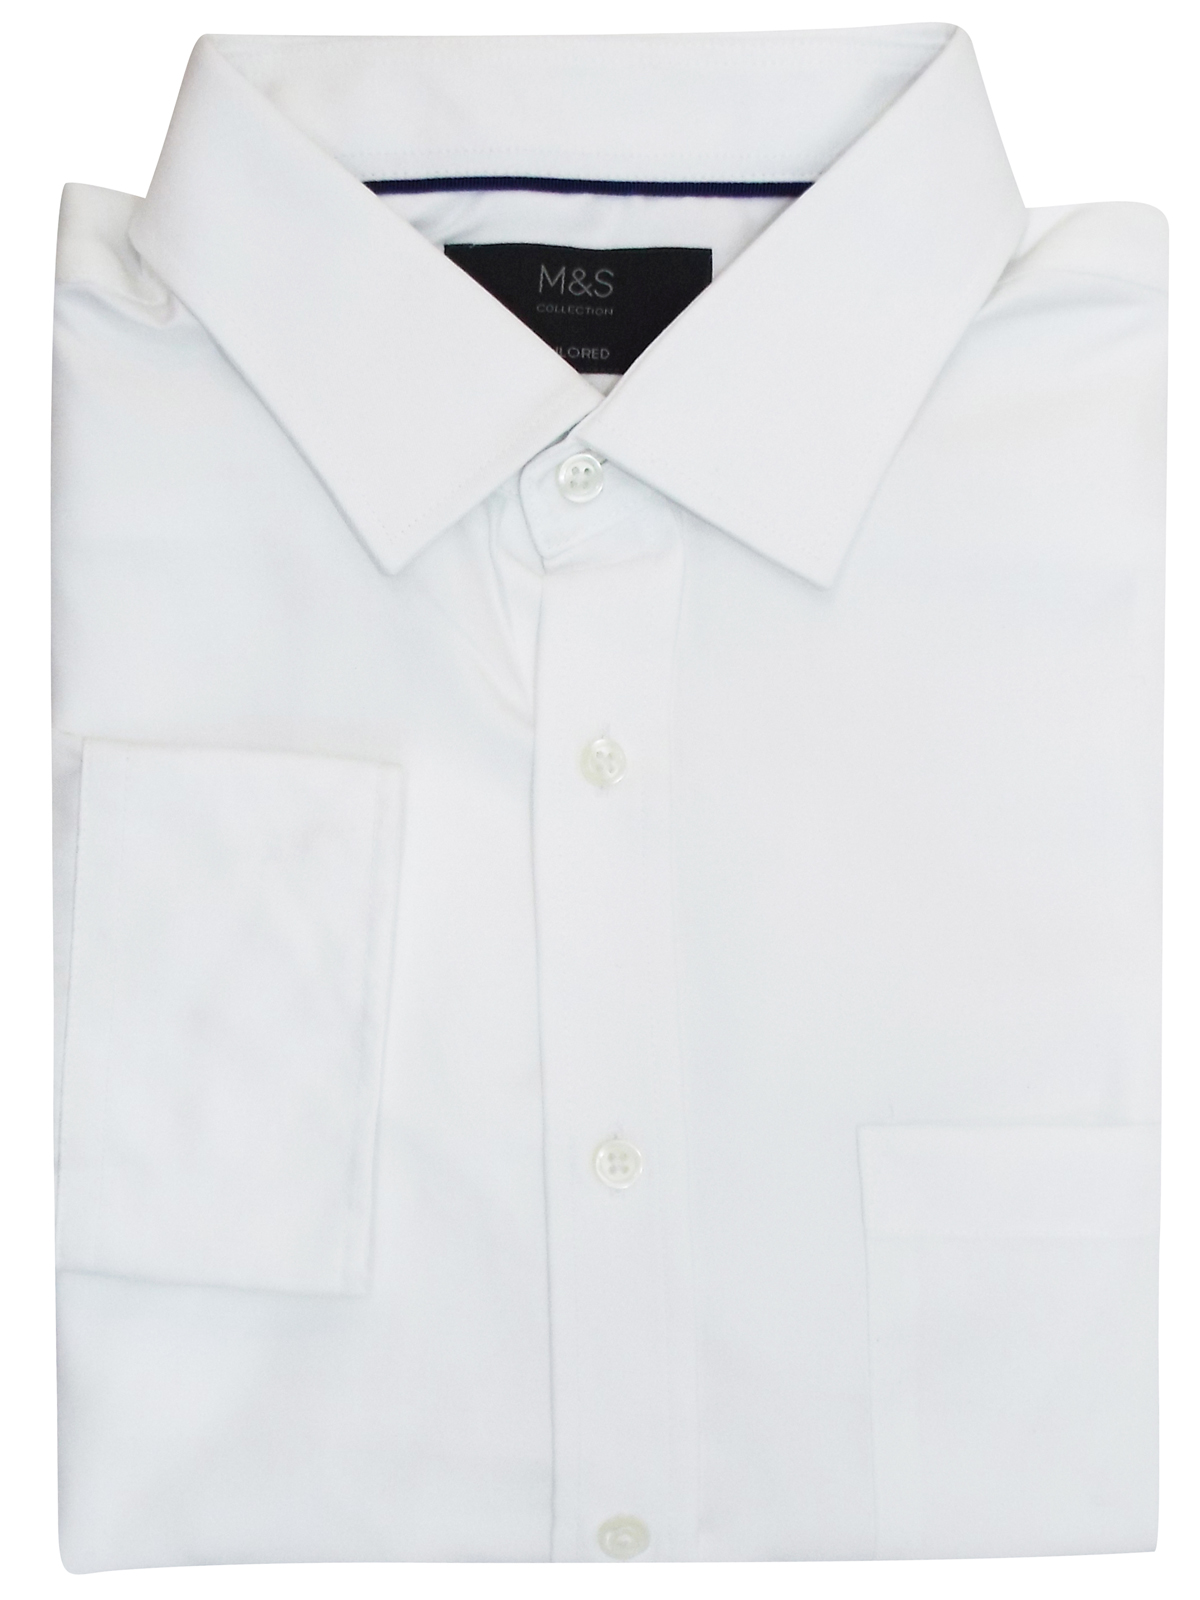 Marks and Spencer - - M&5 WHITE Mens Pure Cotton Tailored Fit Non Iron ...